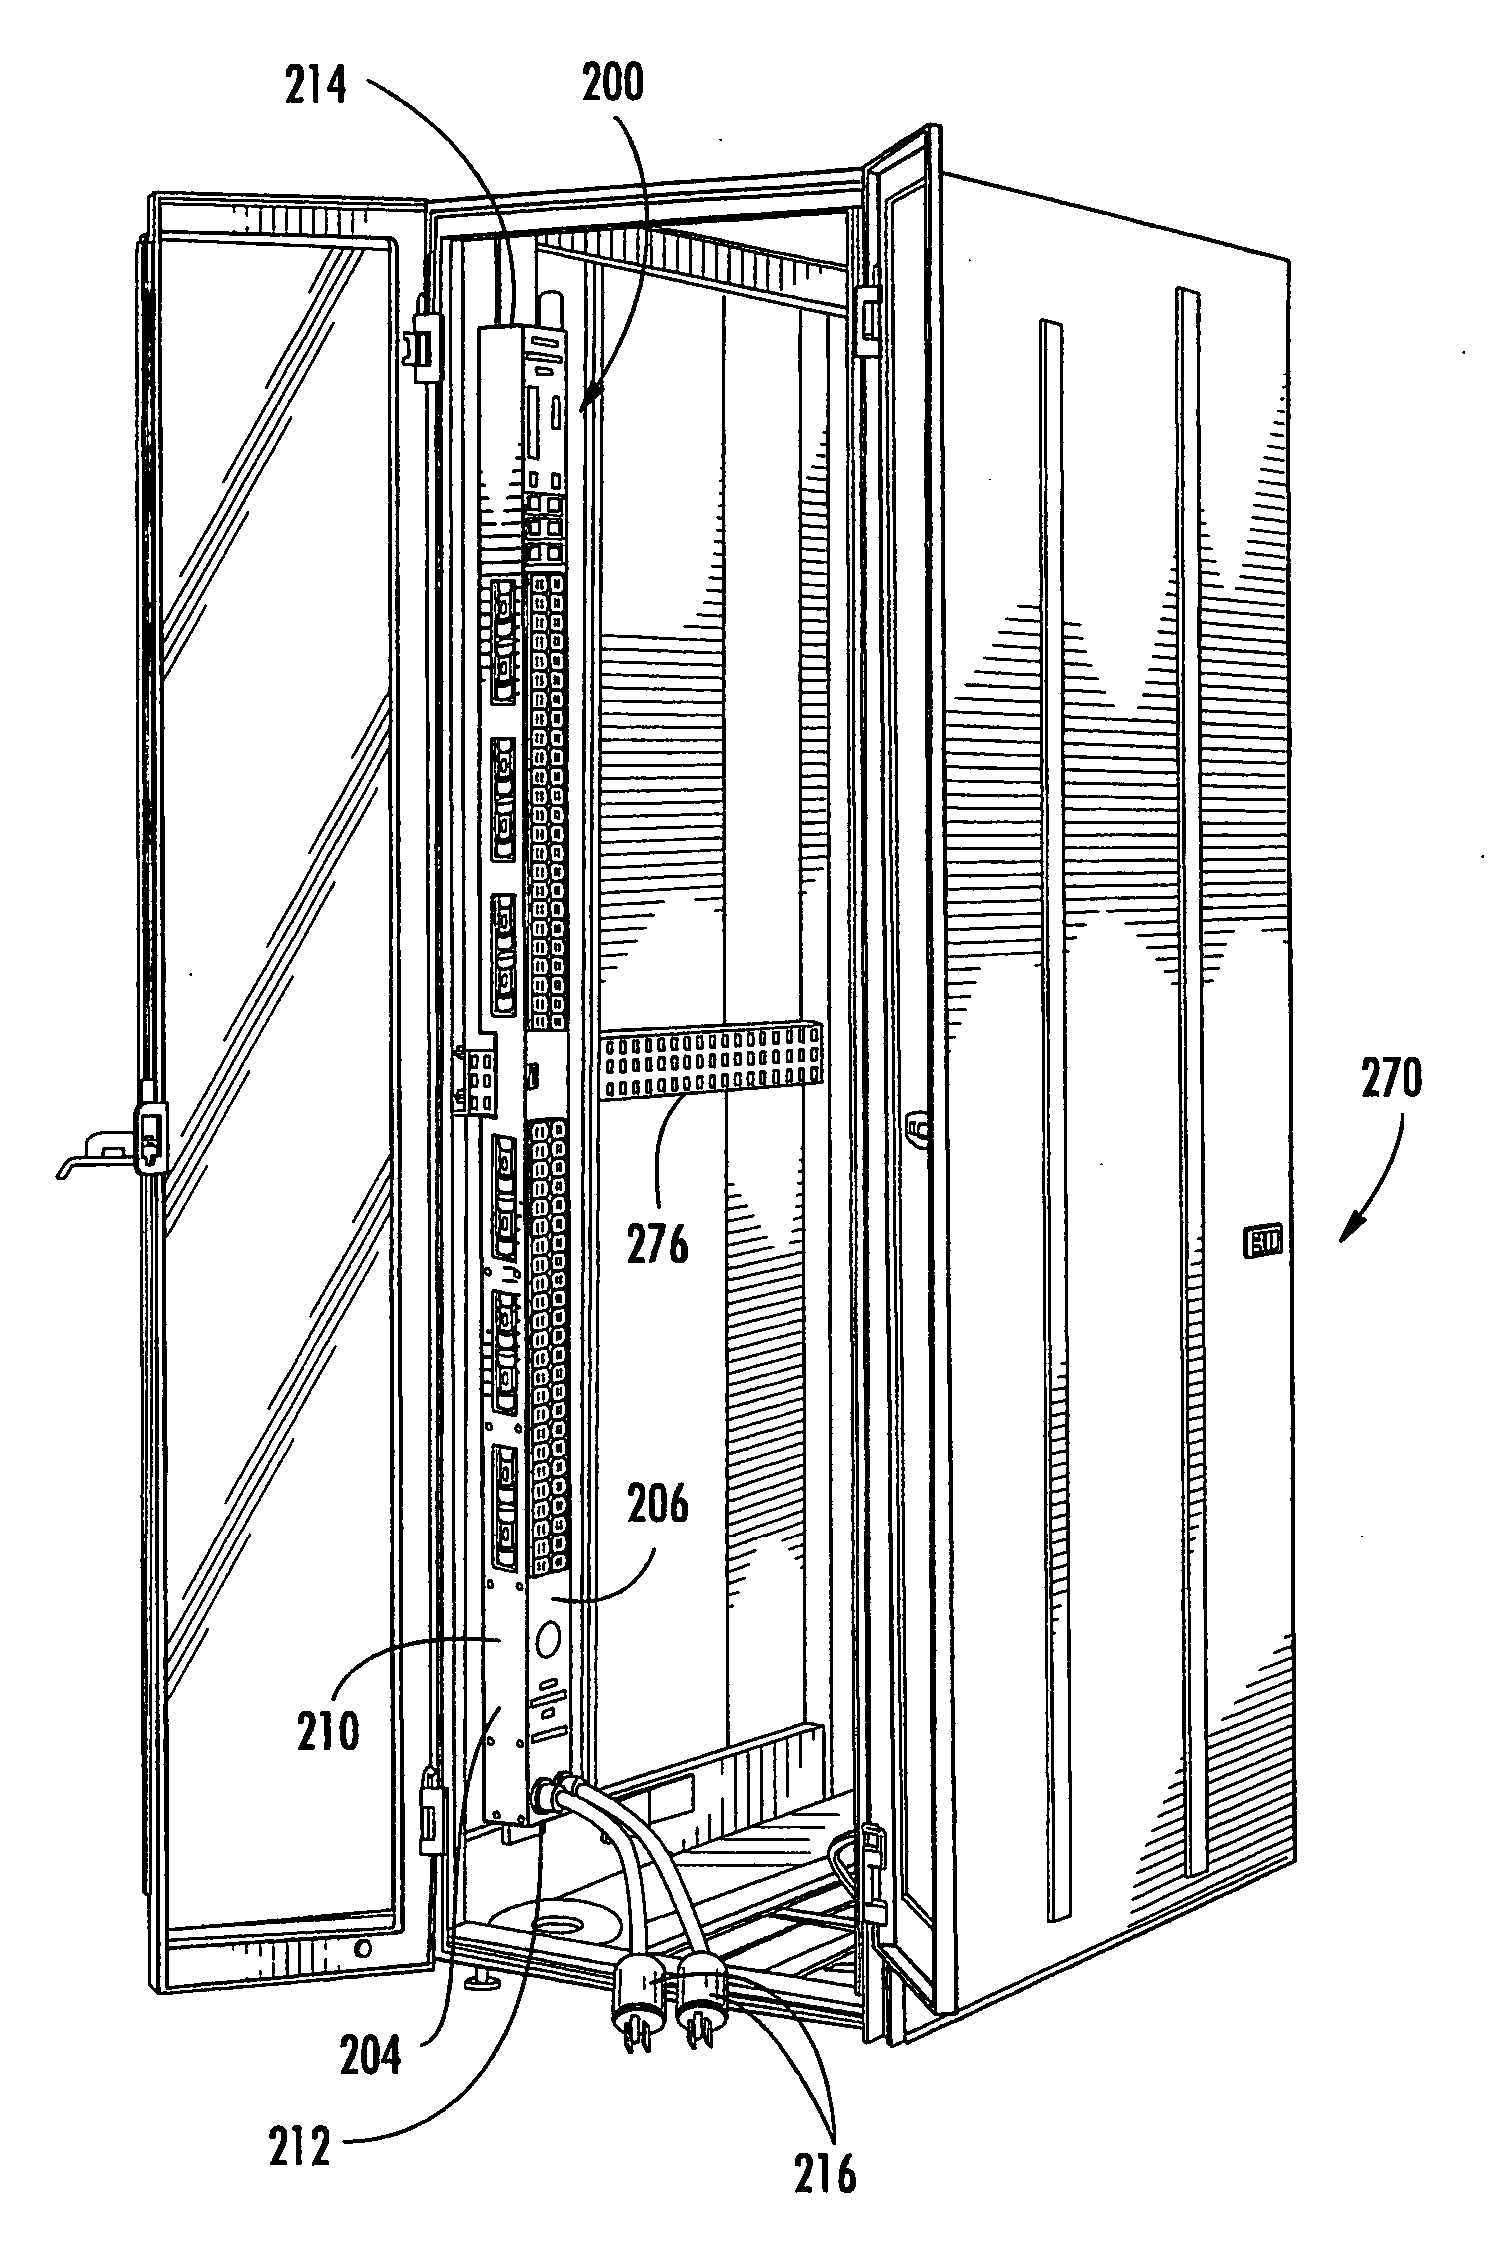 Ganged outlet power distribution apparatus